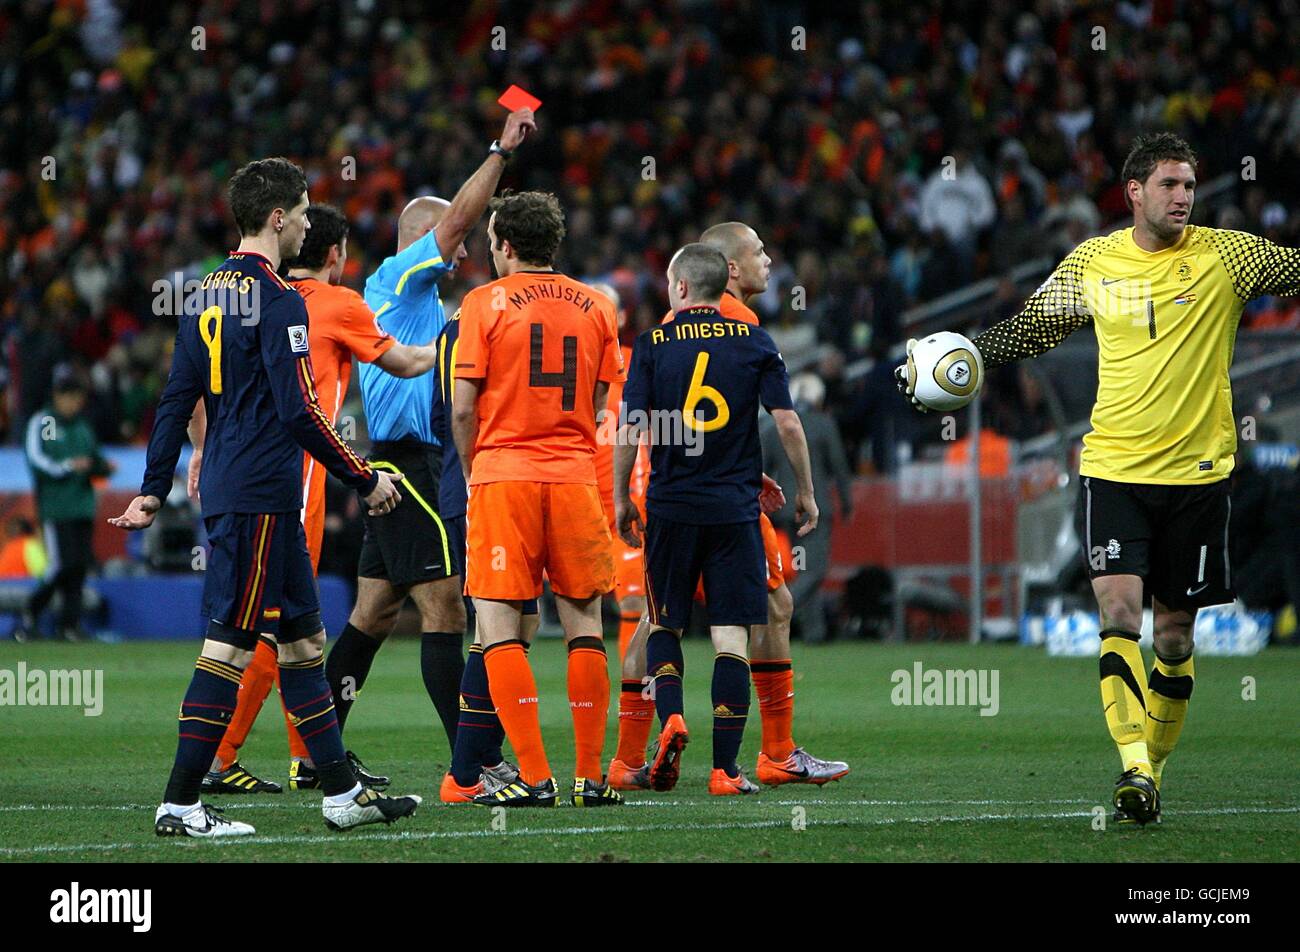 Soccer - 2010 FIFA World Cup South Africa - Final - Netherlands v Spain - Soccer City Stadium. Netherlands' Johnny Heitinga (right) is shown the red card by referee Howard Webb after fouling Spain's Andres Iniesta (6) Stock Photo